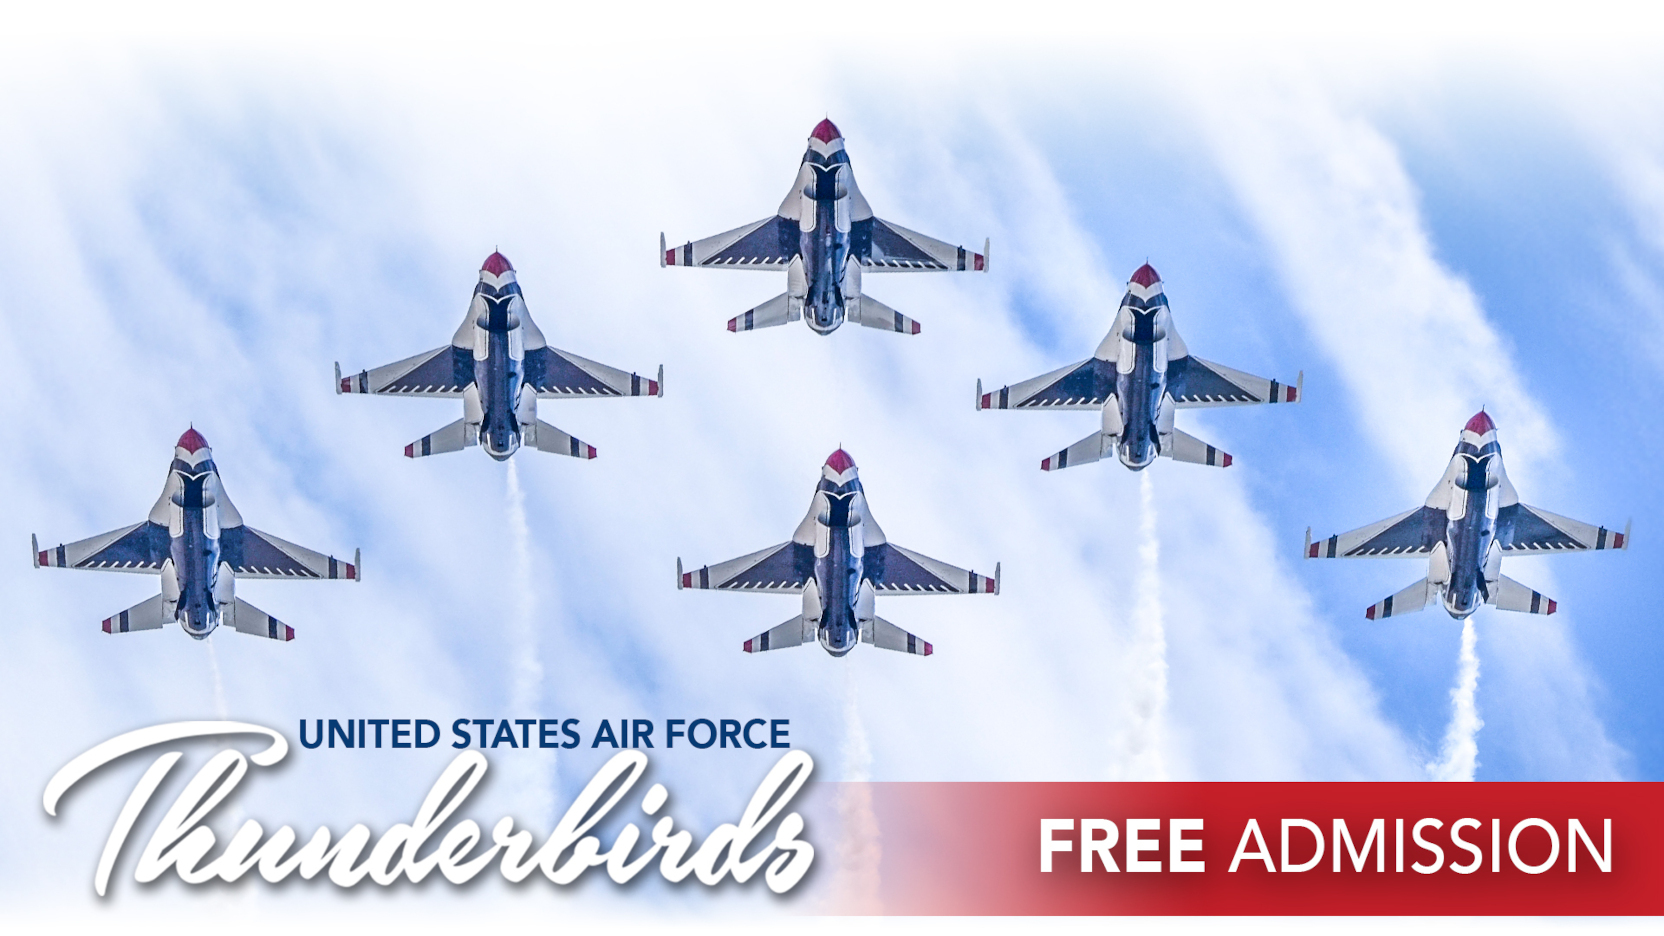 Fort Wayne Air Show - Featuring the United States Air Force Thunderbirds